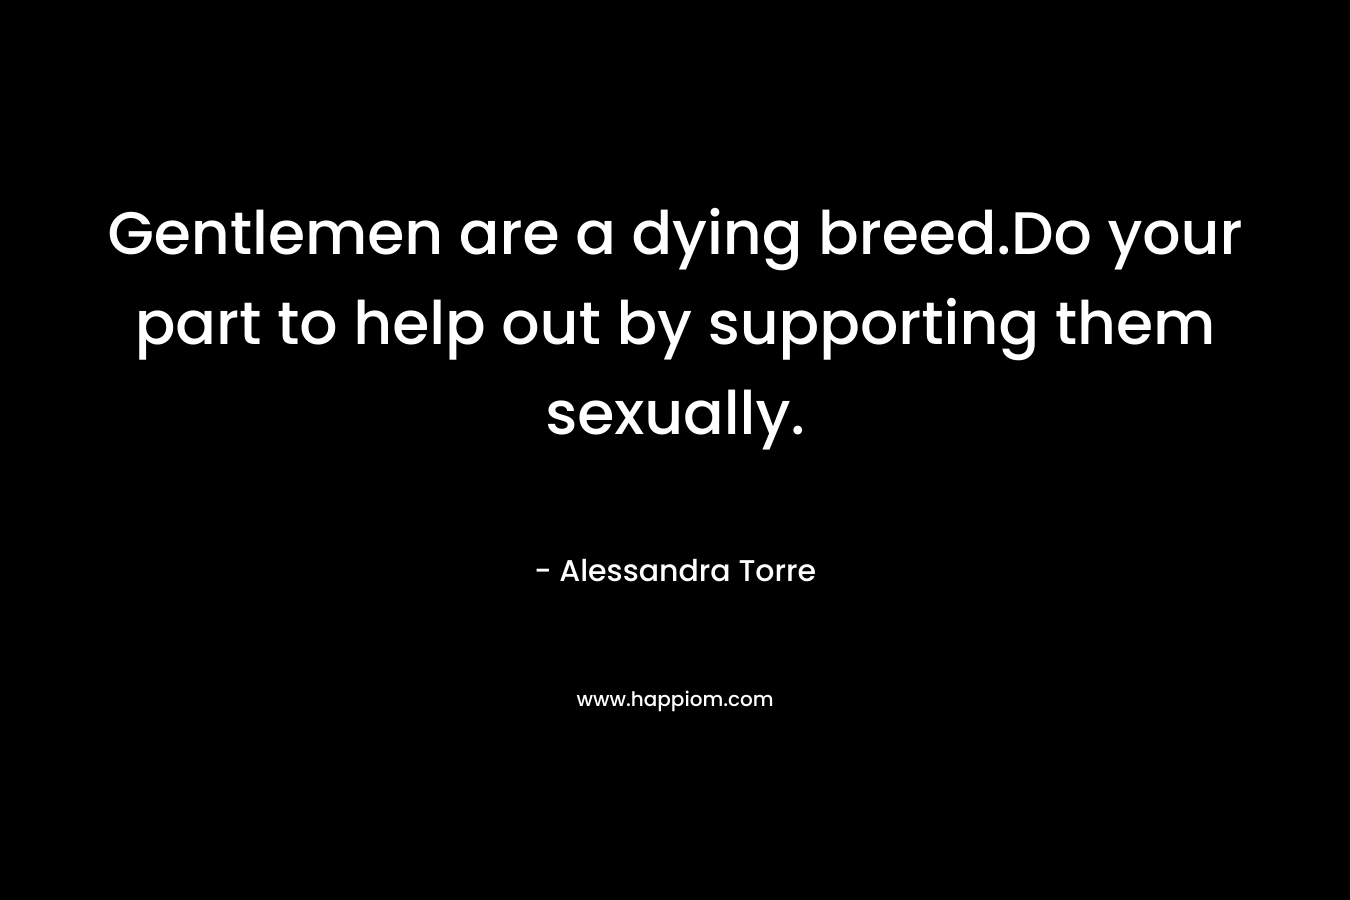 Gentlemen are a dying breed.Do your part to help out by supporting them sexually. – Alessandra Torre